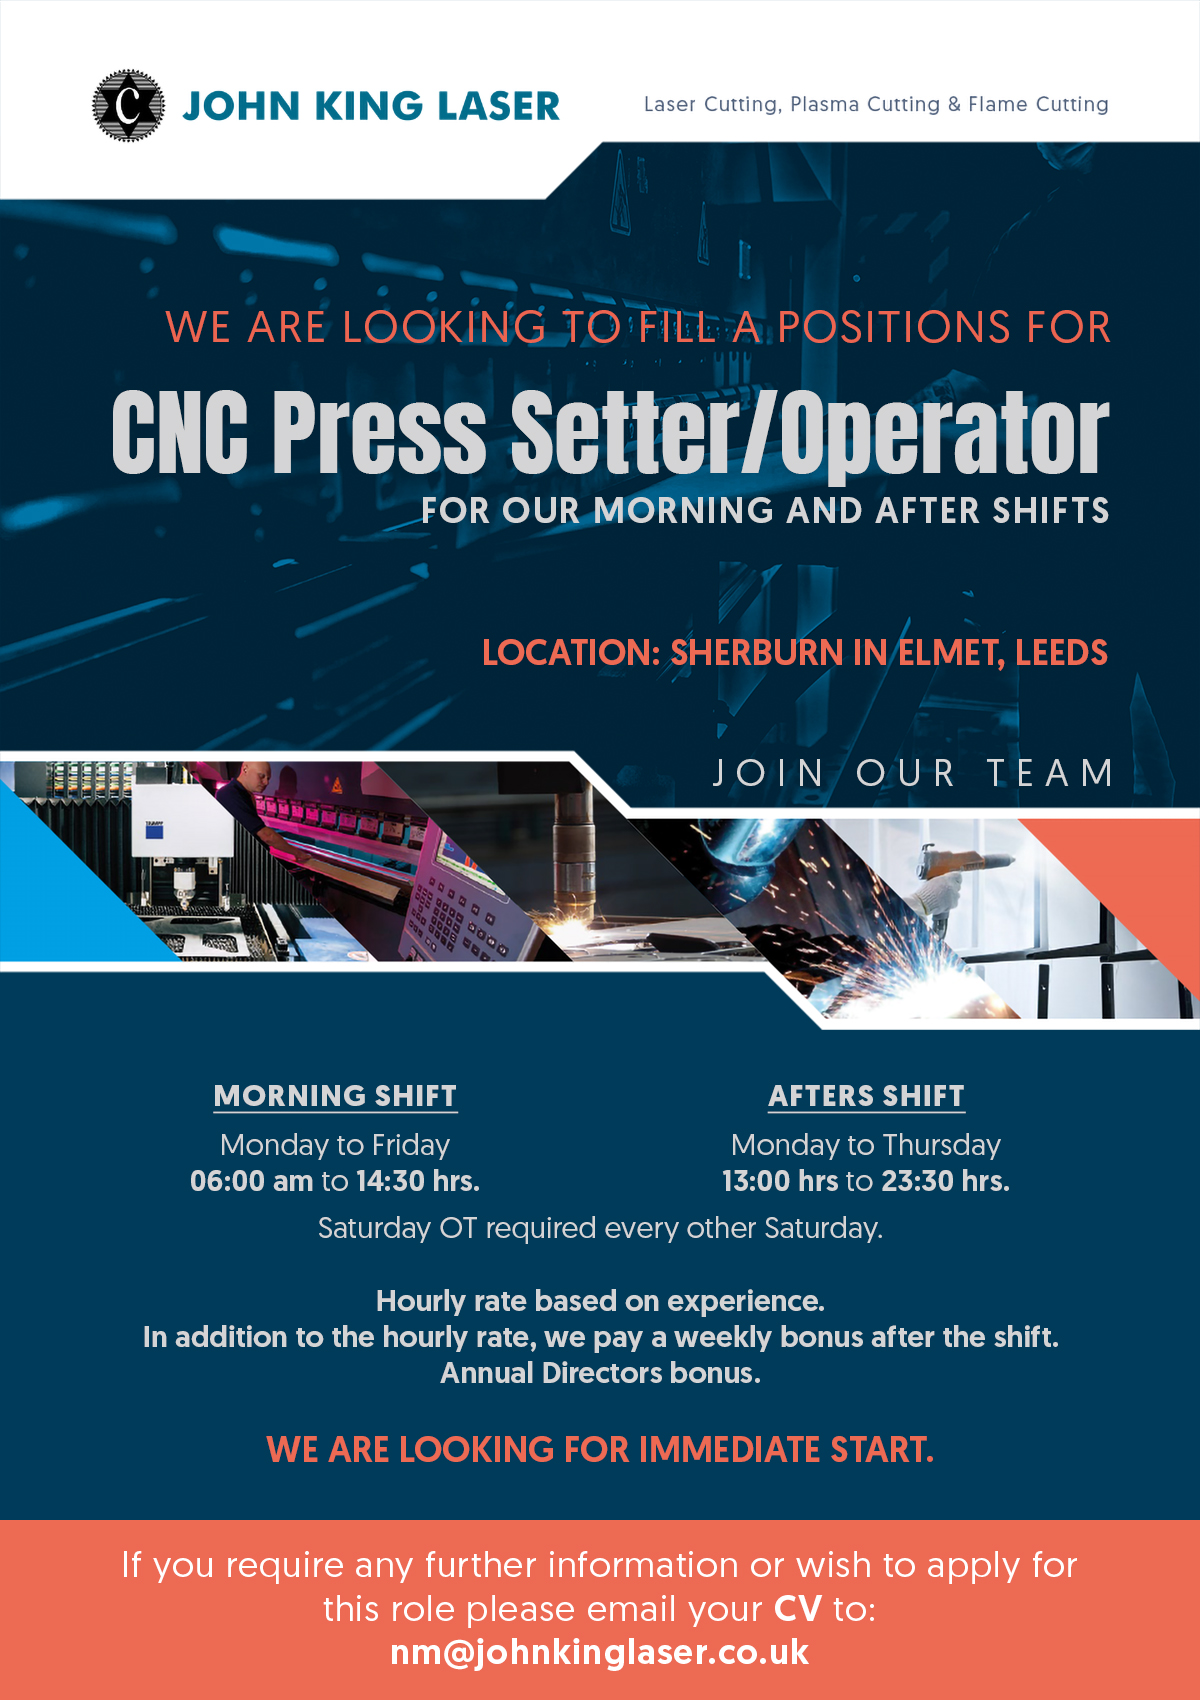 We are looking to fill a positions for CNC Press Setter/Operator for our Morning and After Shifts